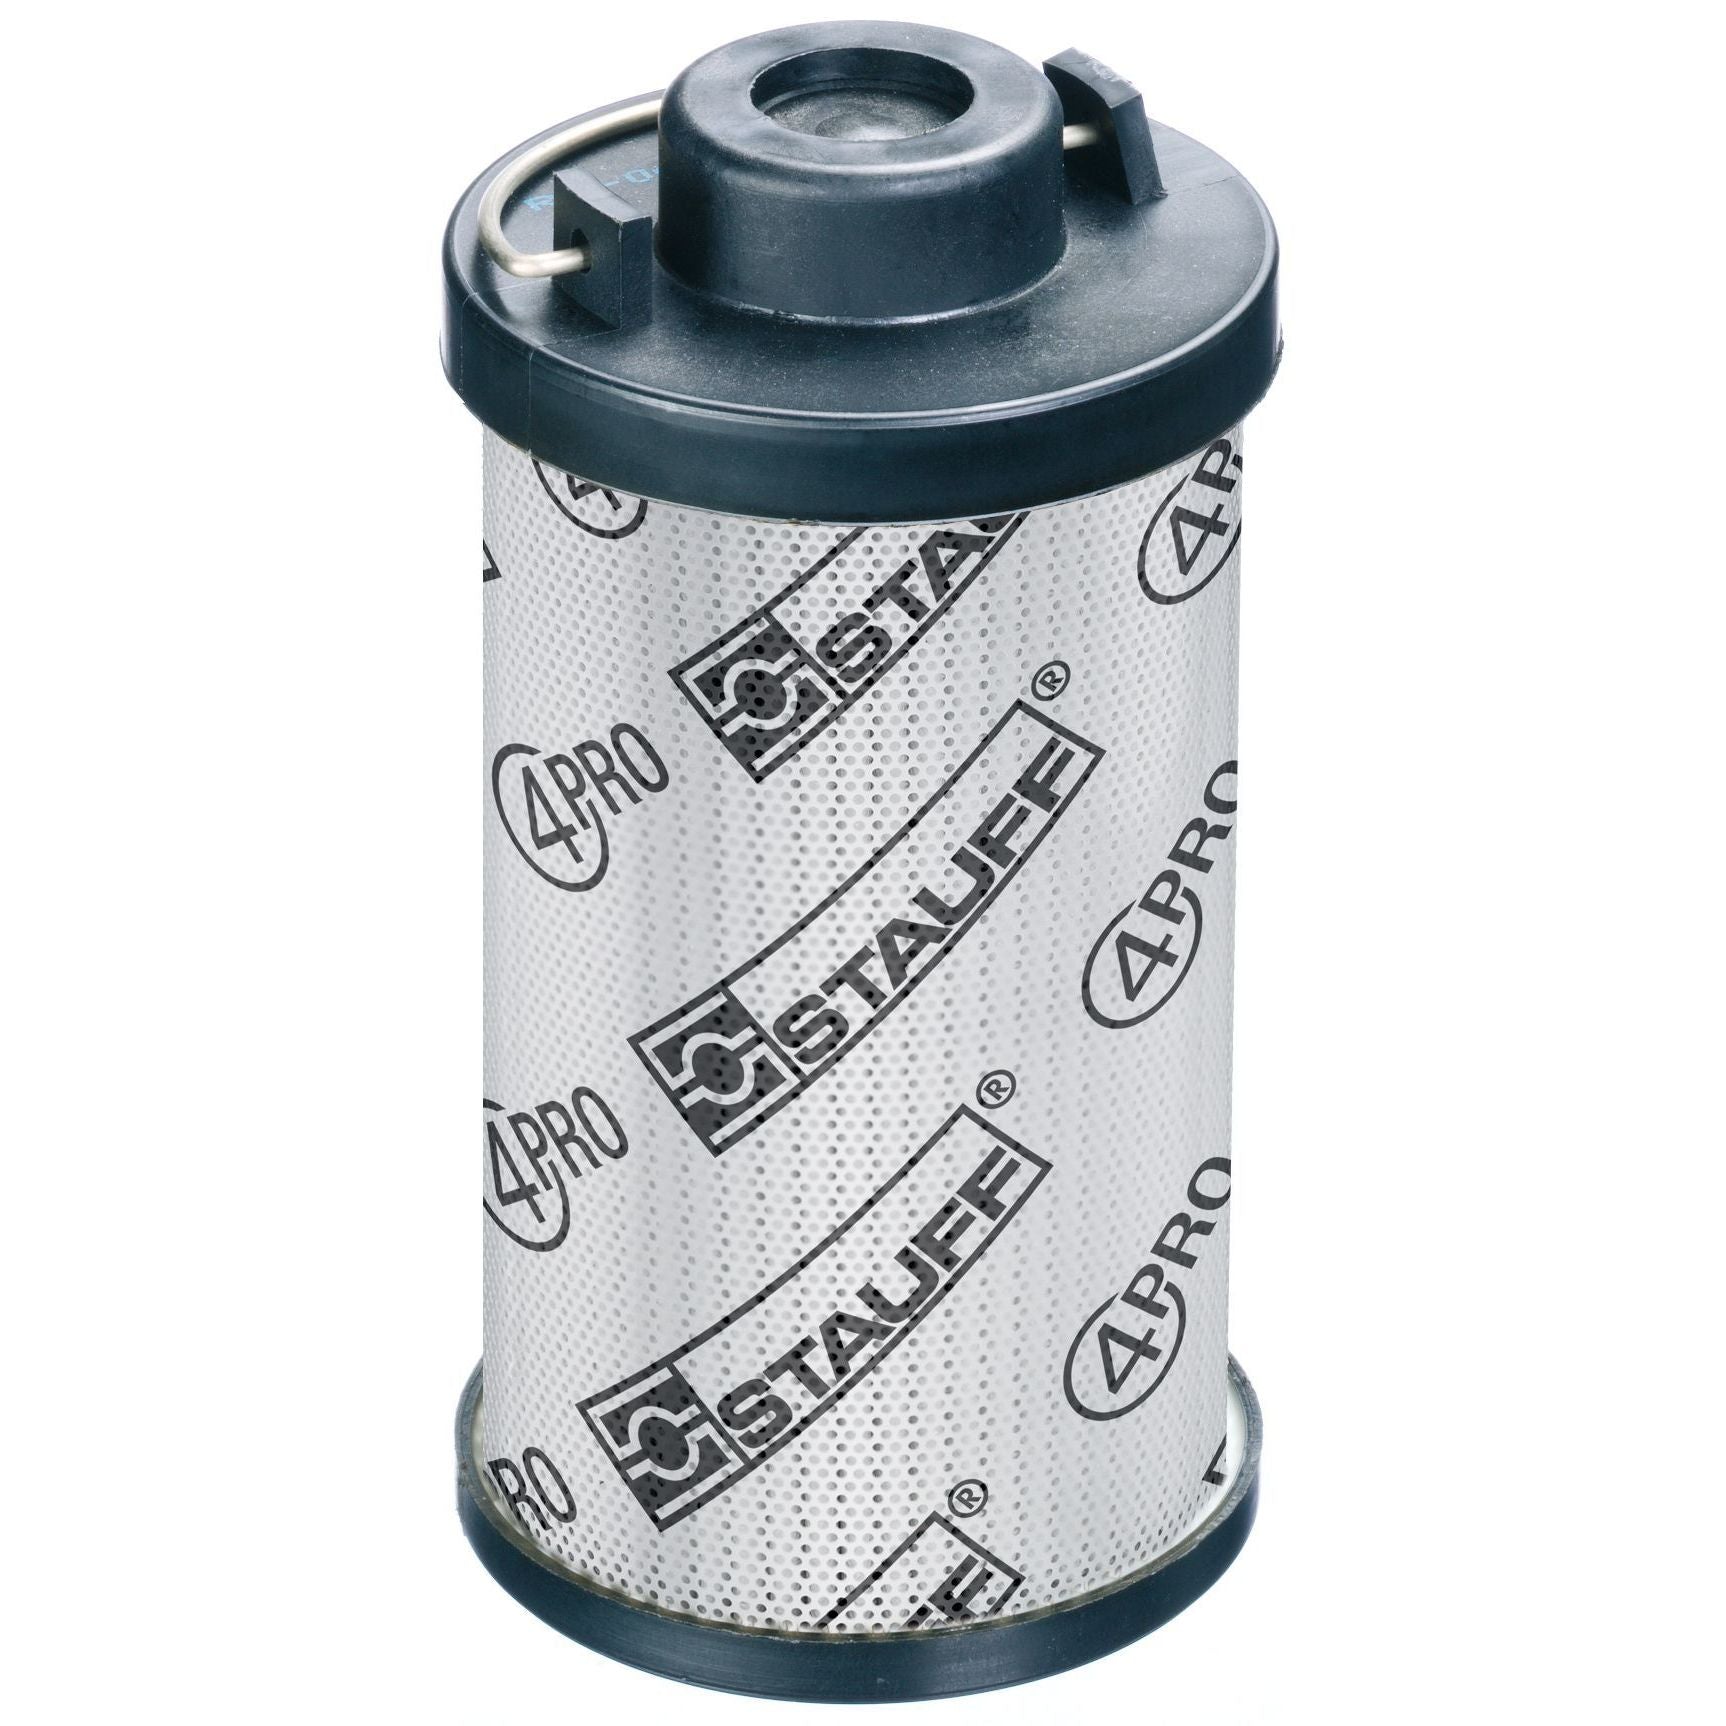 RE-090-N-10-B/2 : Stauff RF-090 Series Filter Element, 10 Micron, Paper Media, 145psi Collapse Differential, Buna